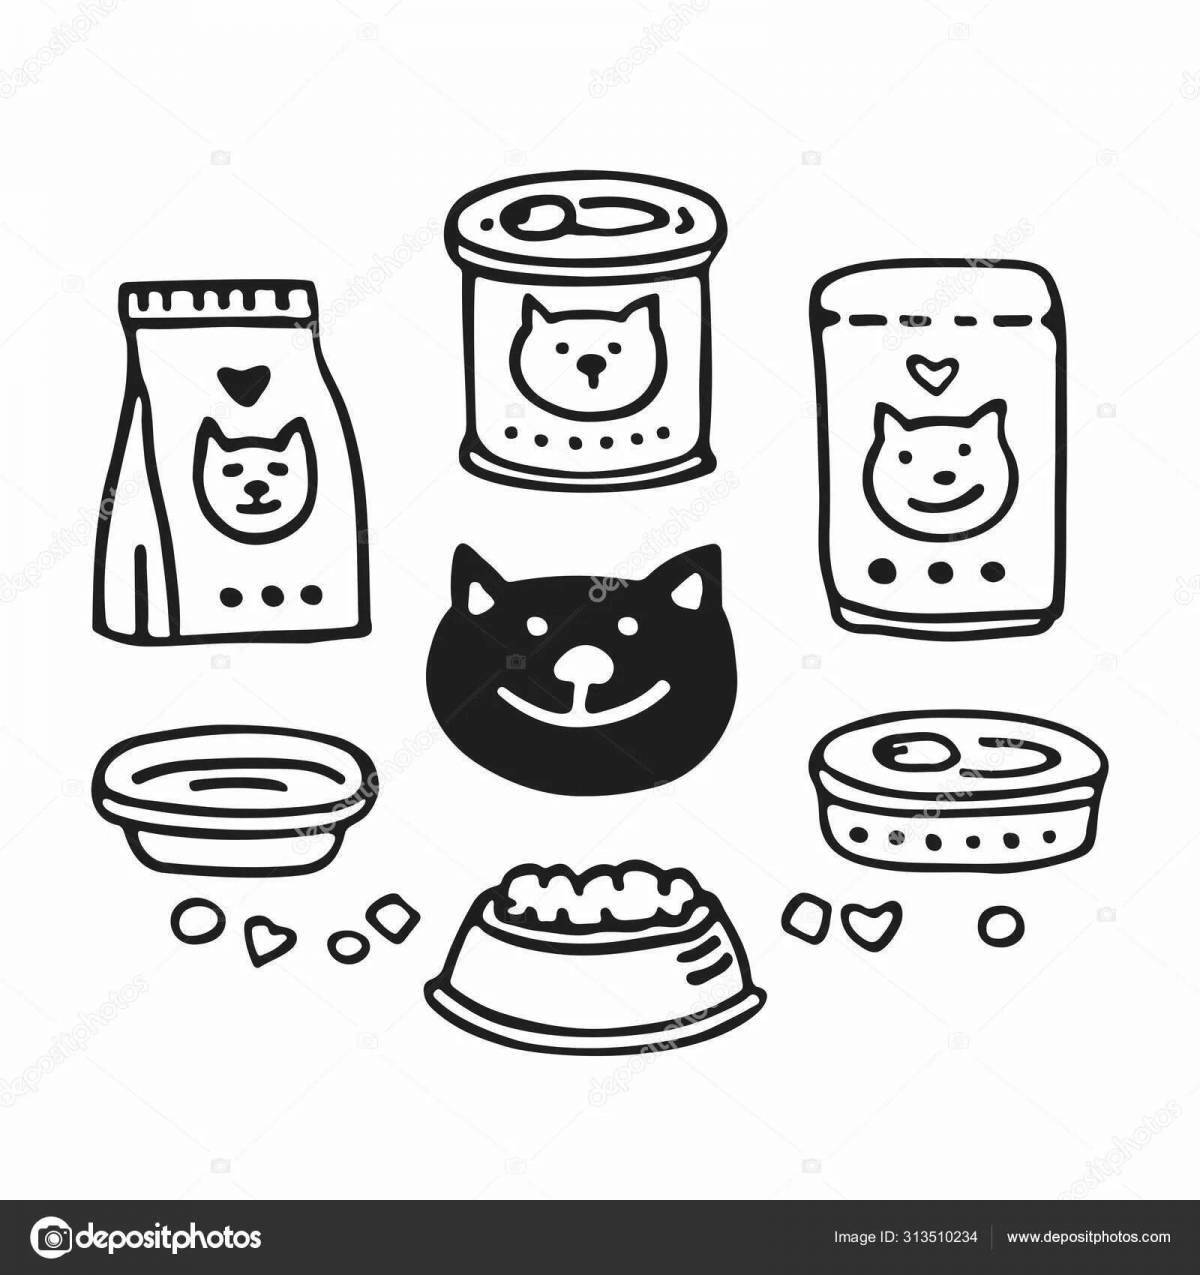 Showy cat food coloring page